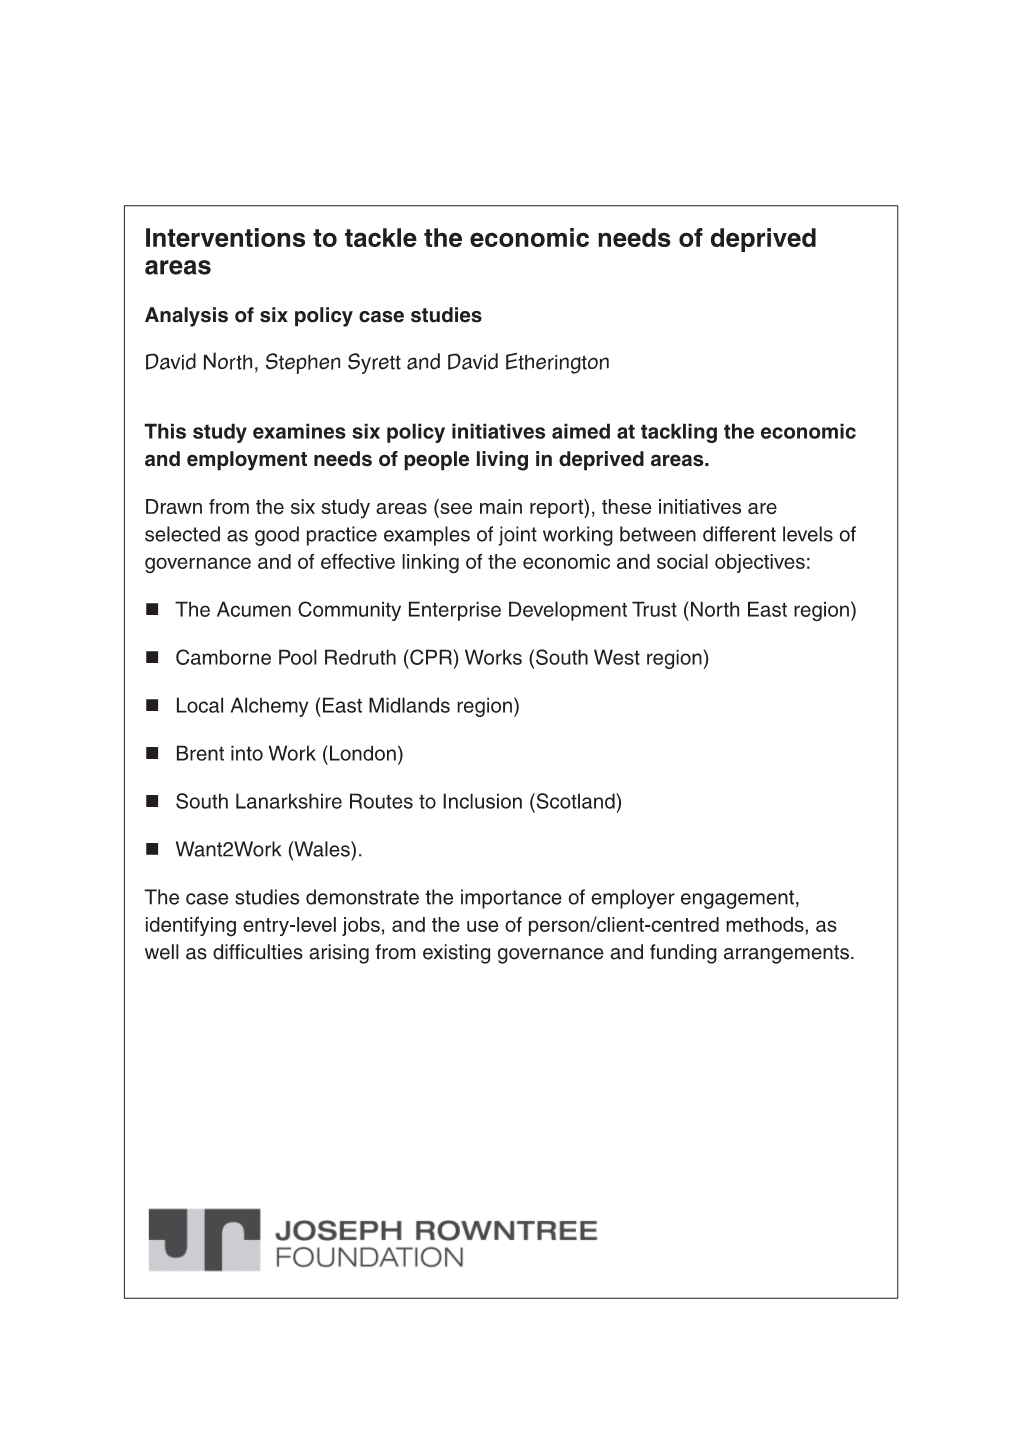 Interventions to Tackle the Economic Needs of Deprived Areas